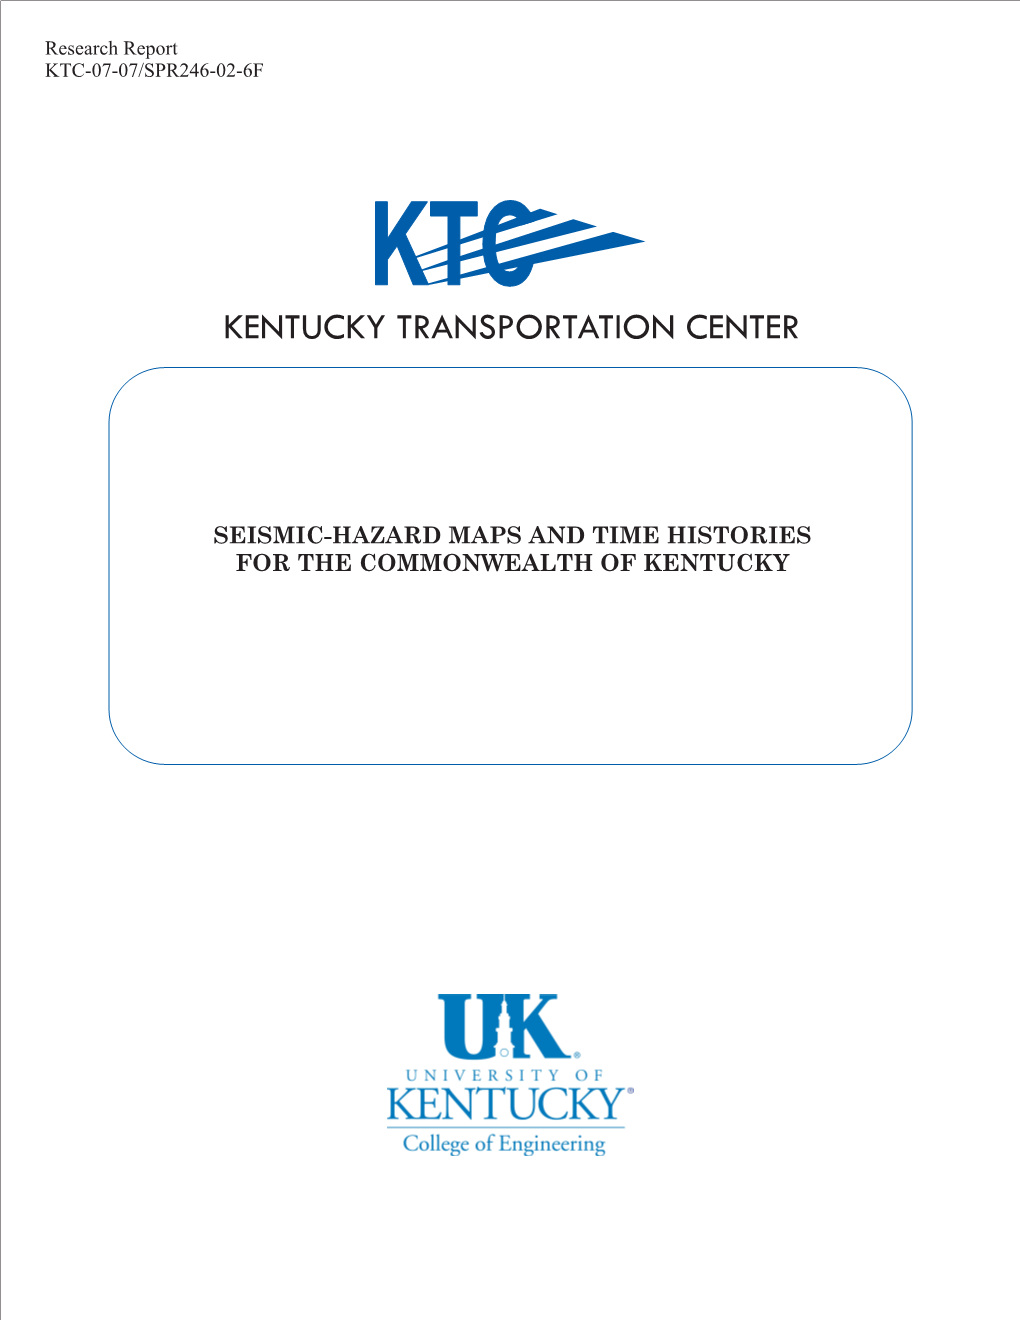 Seismic-Hazard Maps and Time Histories for the Commonwealth of Kentucky Our Mission